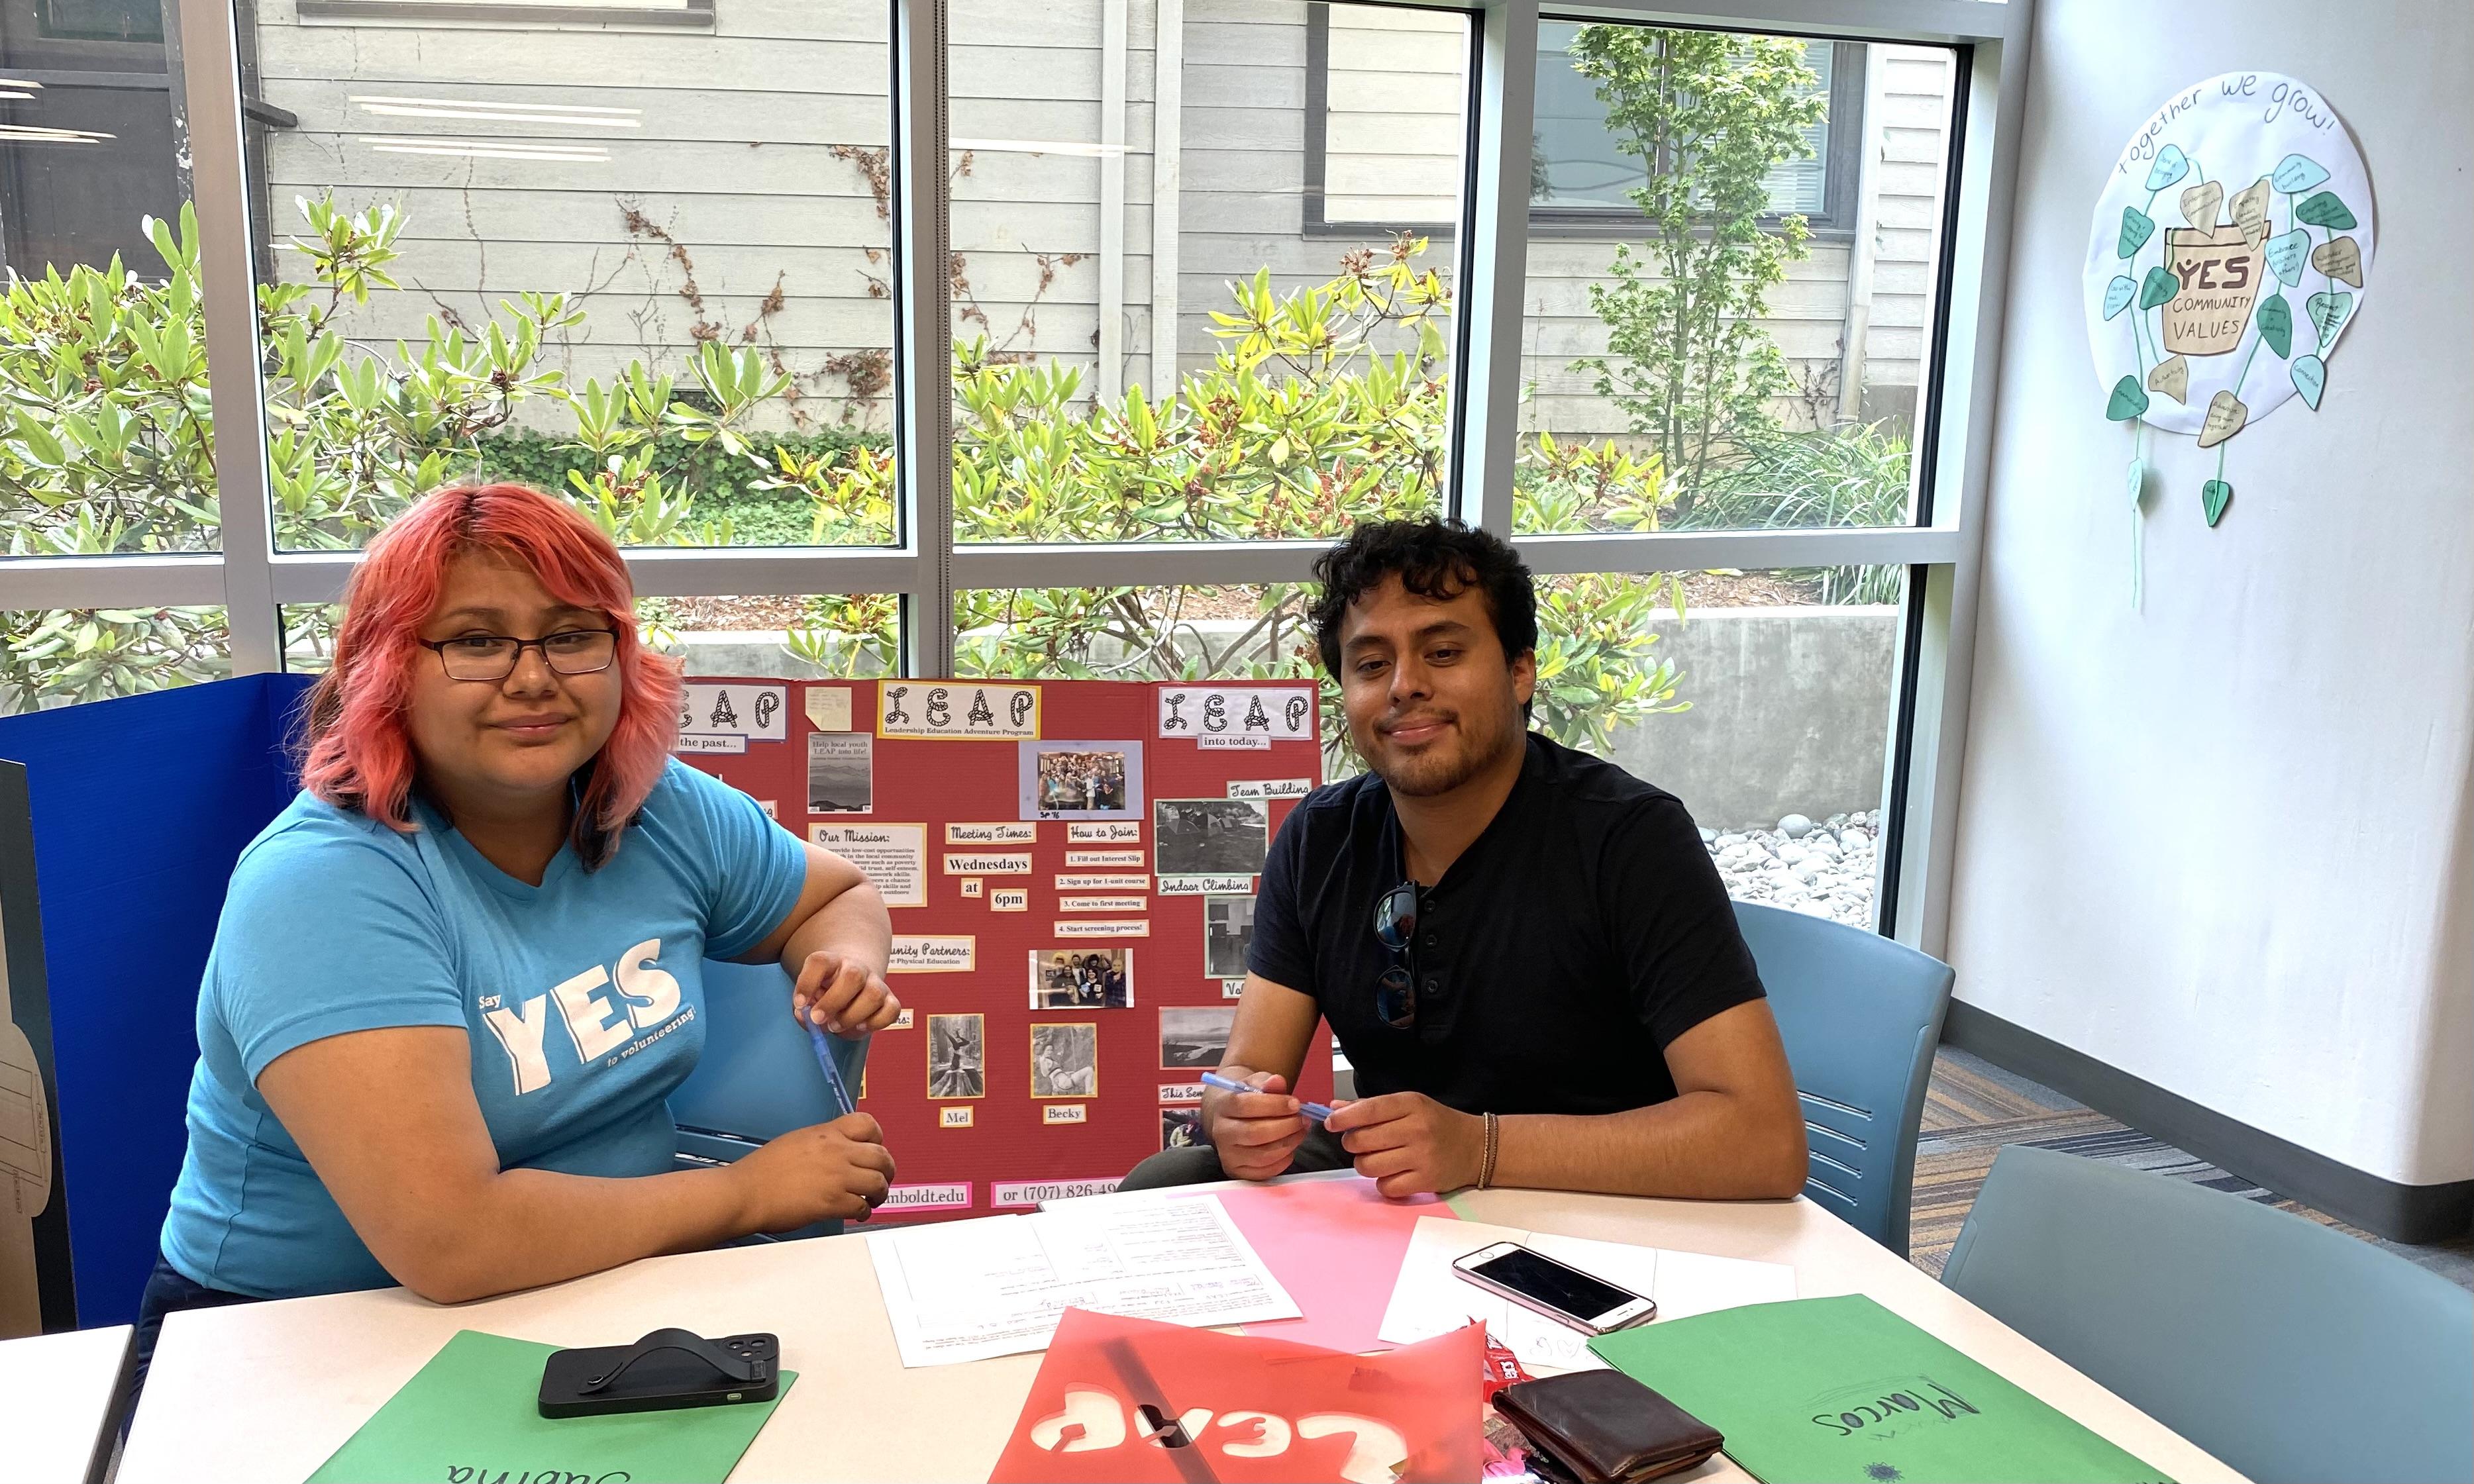 Marcos and Sabiha, the LEAP directors work together at YES